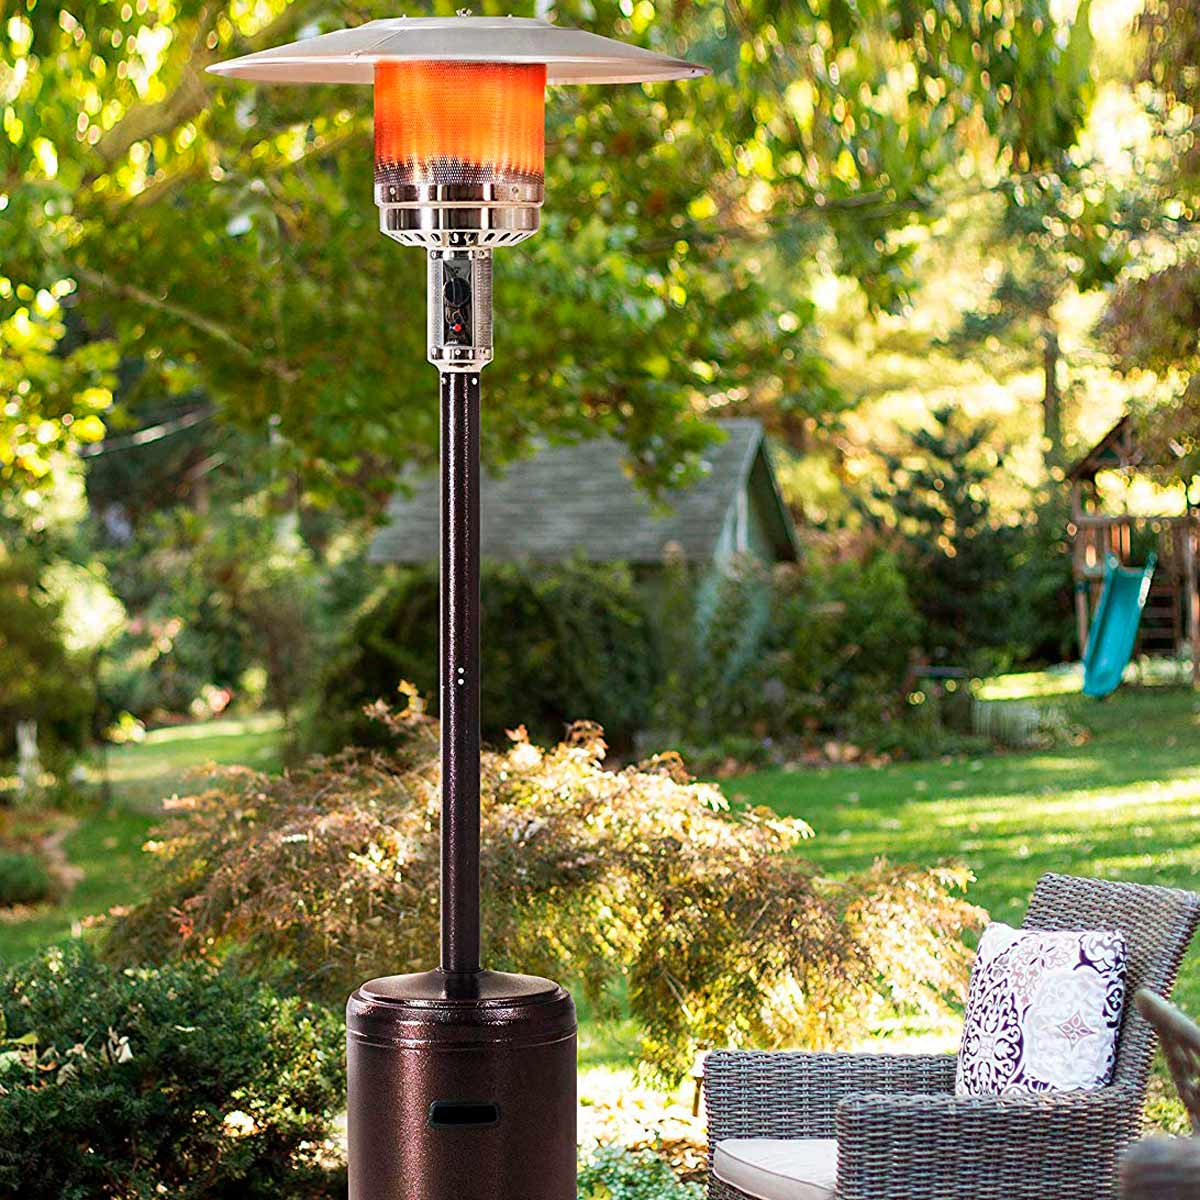 13 Outdoor Patio Heaters To Keep You Cozy Family Handyman within dimensions 1200 X 1200